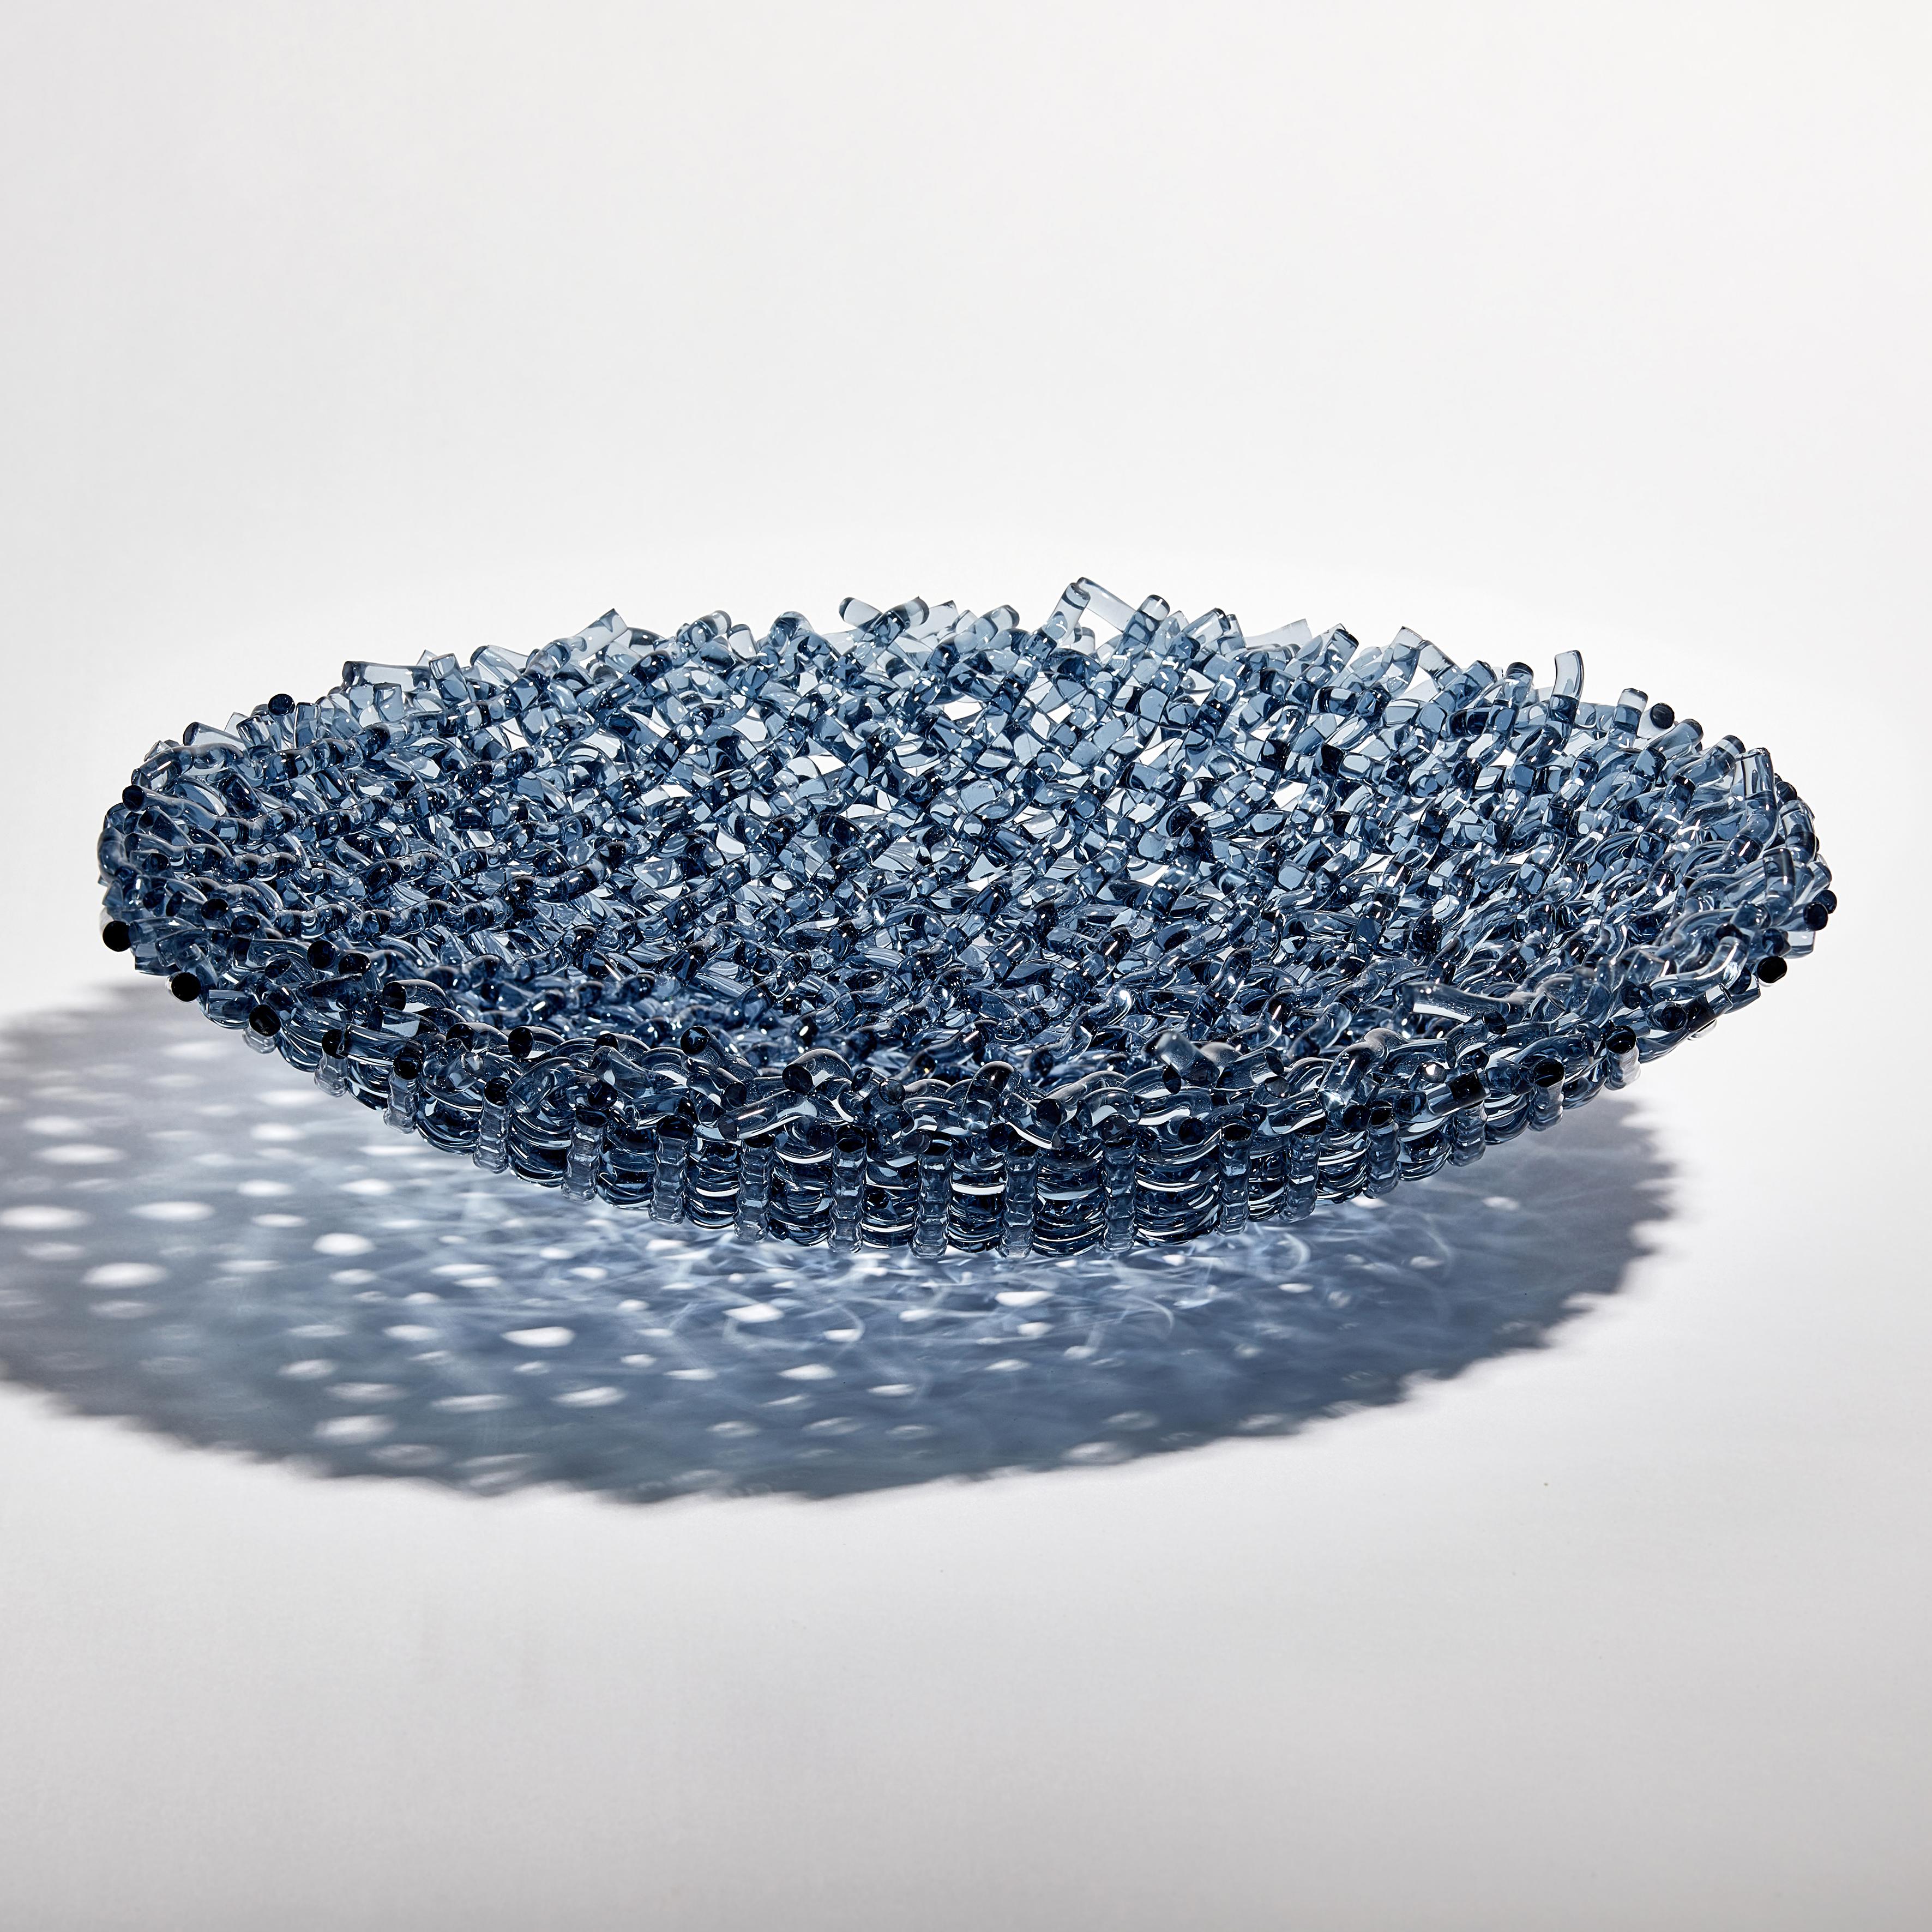 Meltwater is a unique clear glass sculptural centrepiece by the British artist Cathryn Shilling. Using chunky glass rods in steel blue, which are harder to source, Shilling weaves and layers these to beautiful effect. Being thicker than her usual